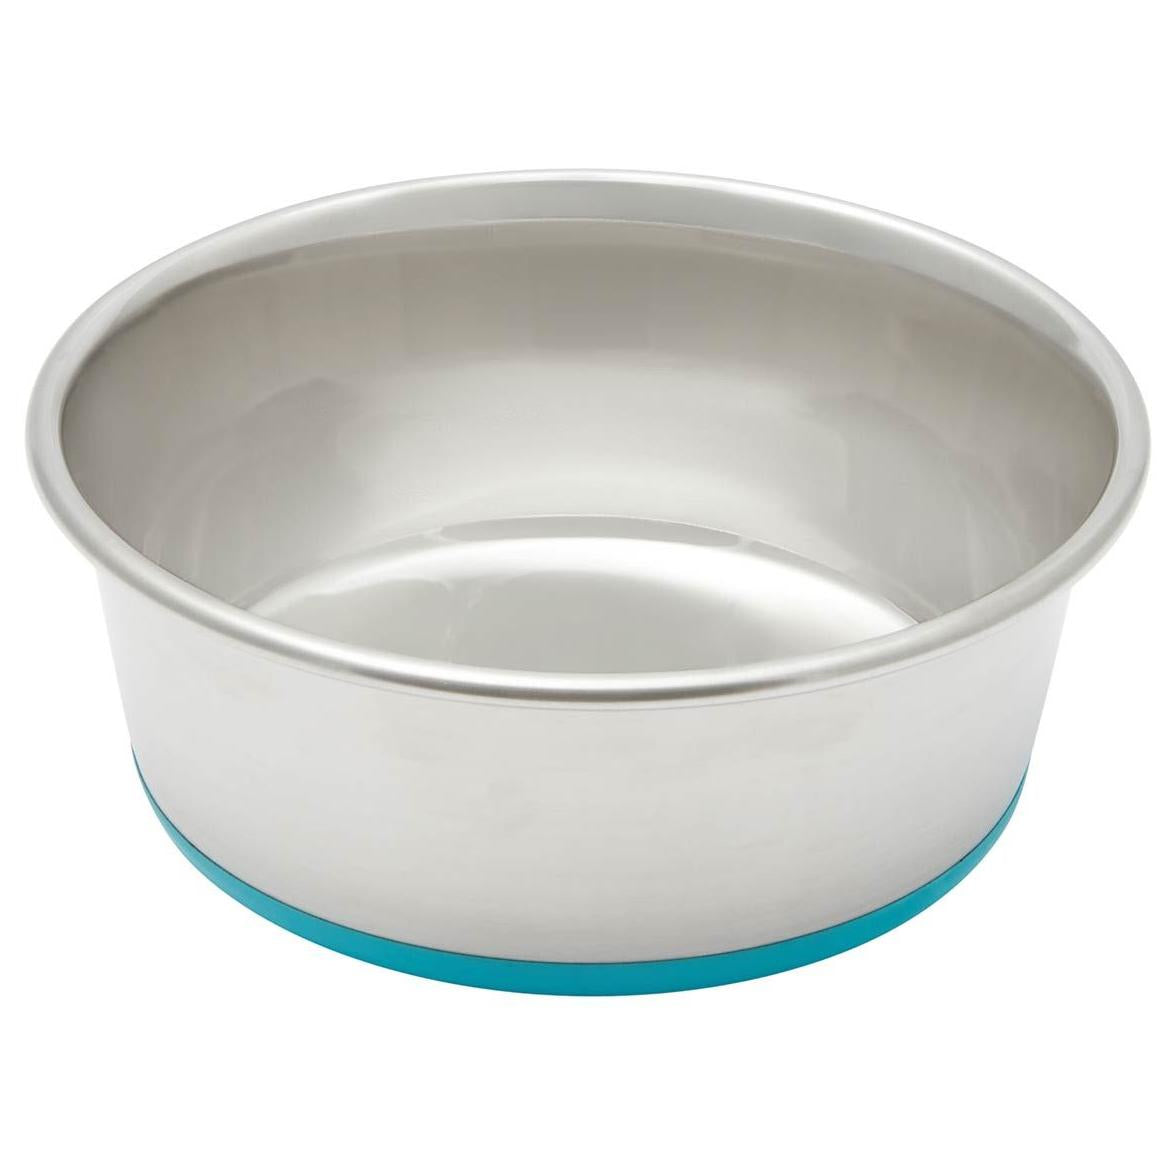 Lexi & Me Stainless Steel Bowl (100000022247) [Teal]